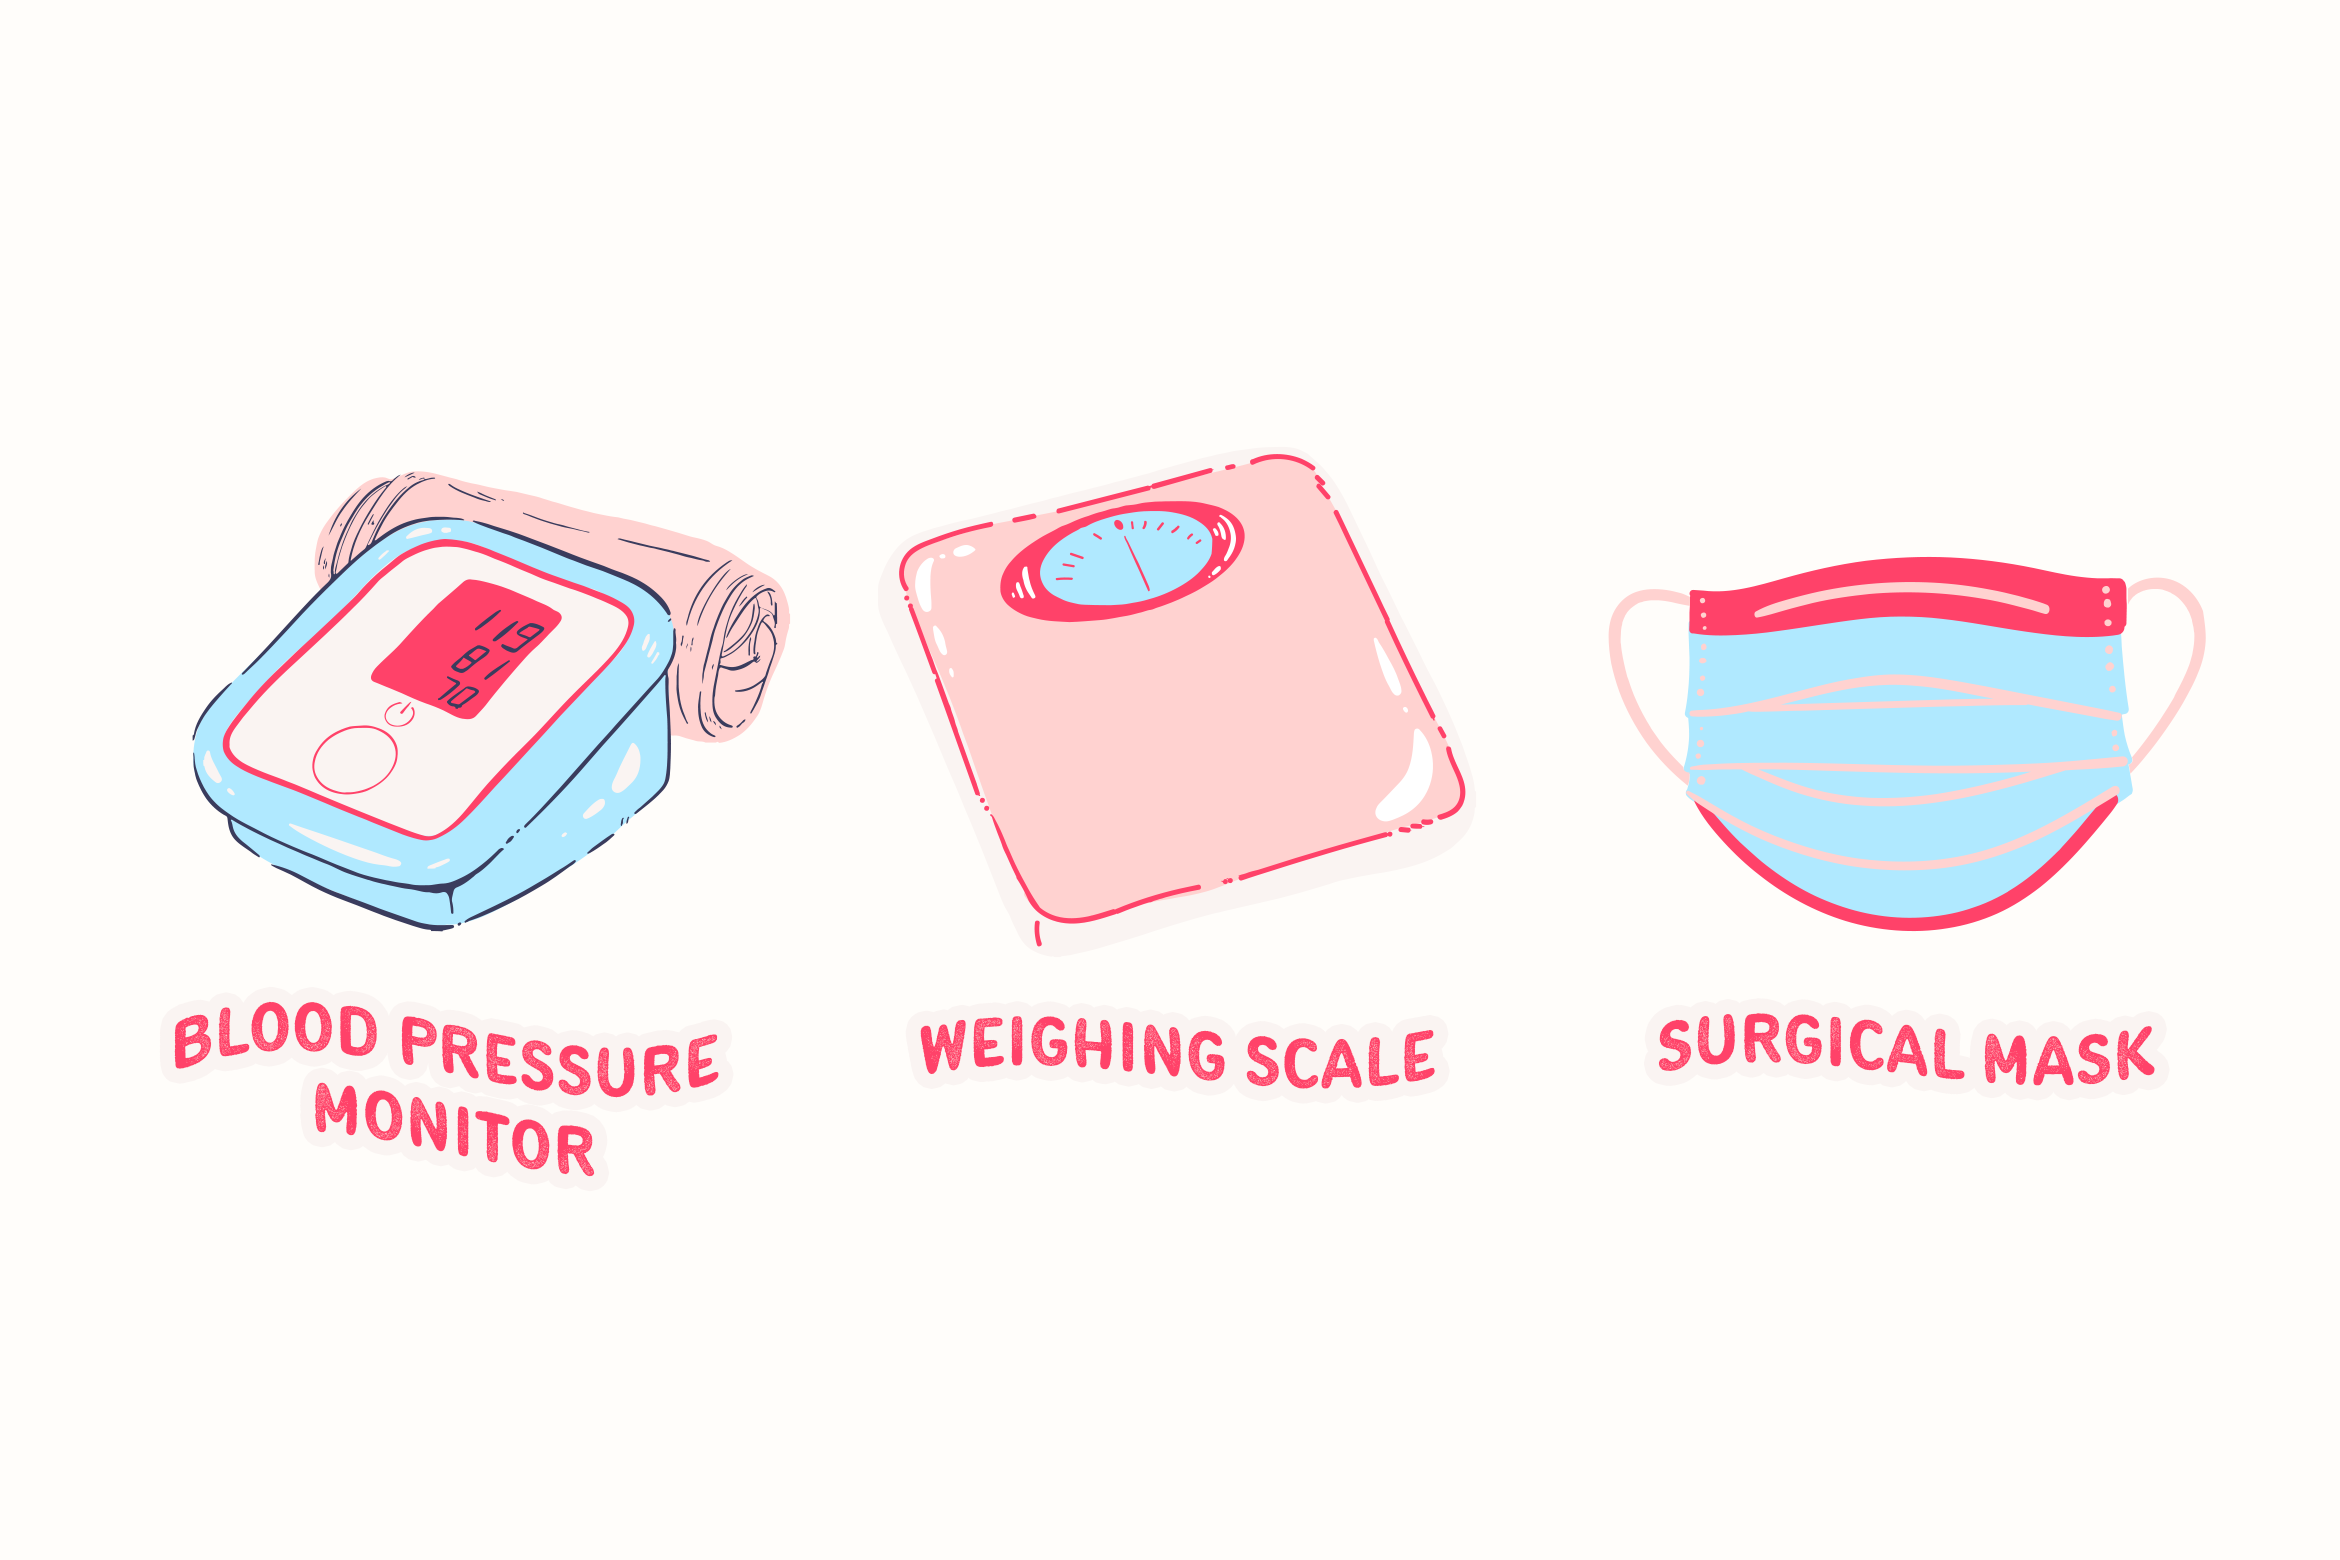 https://peterdraw.studio/wp-content/uploads/2022/12/Finest-Cute-Medical-Equipment-Illustration-Set-with-Baby-Pink-Shocking-Pink-Baby-Blue-Navy-Beige-and-White-colors-2.png